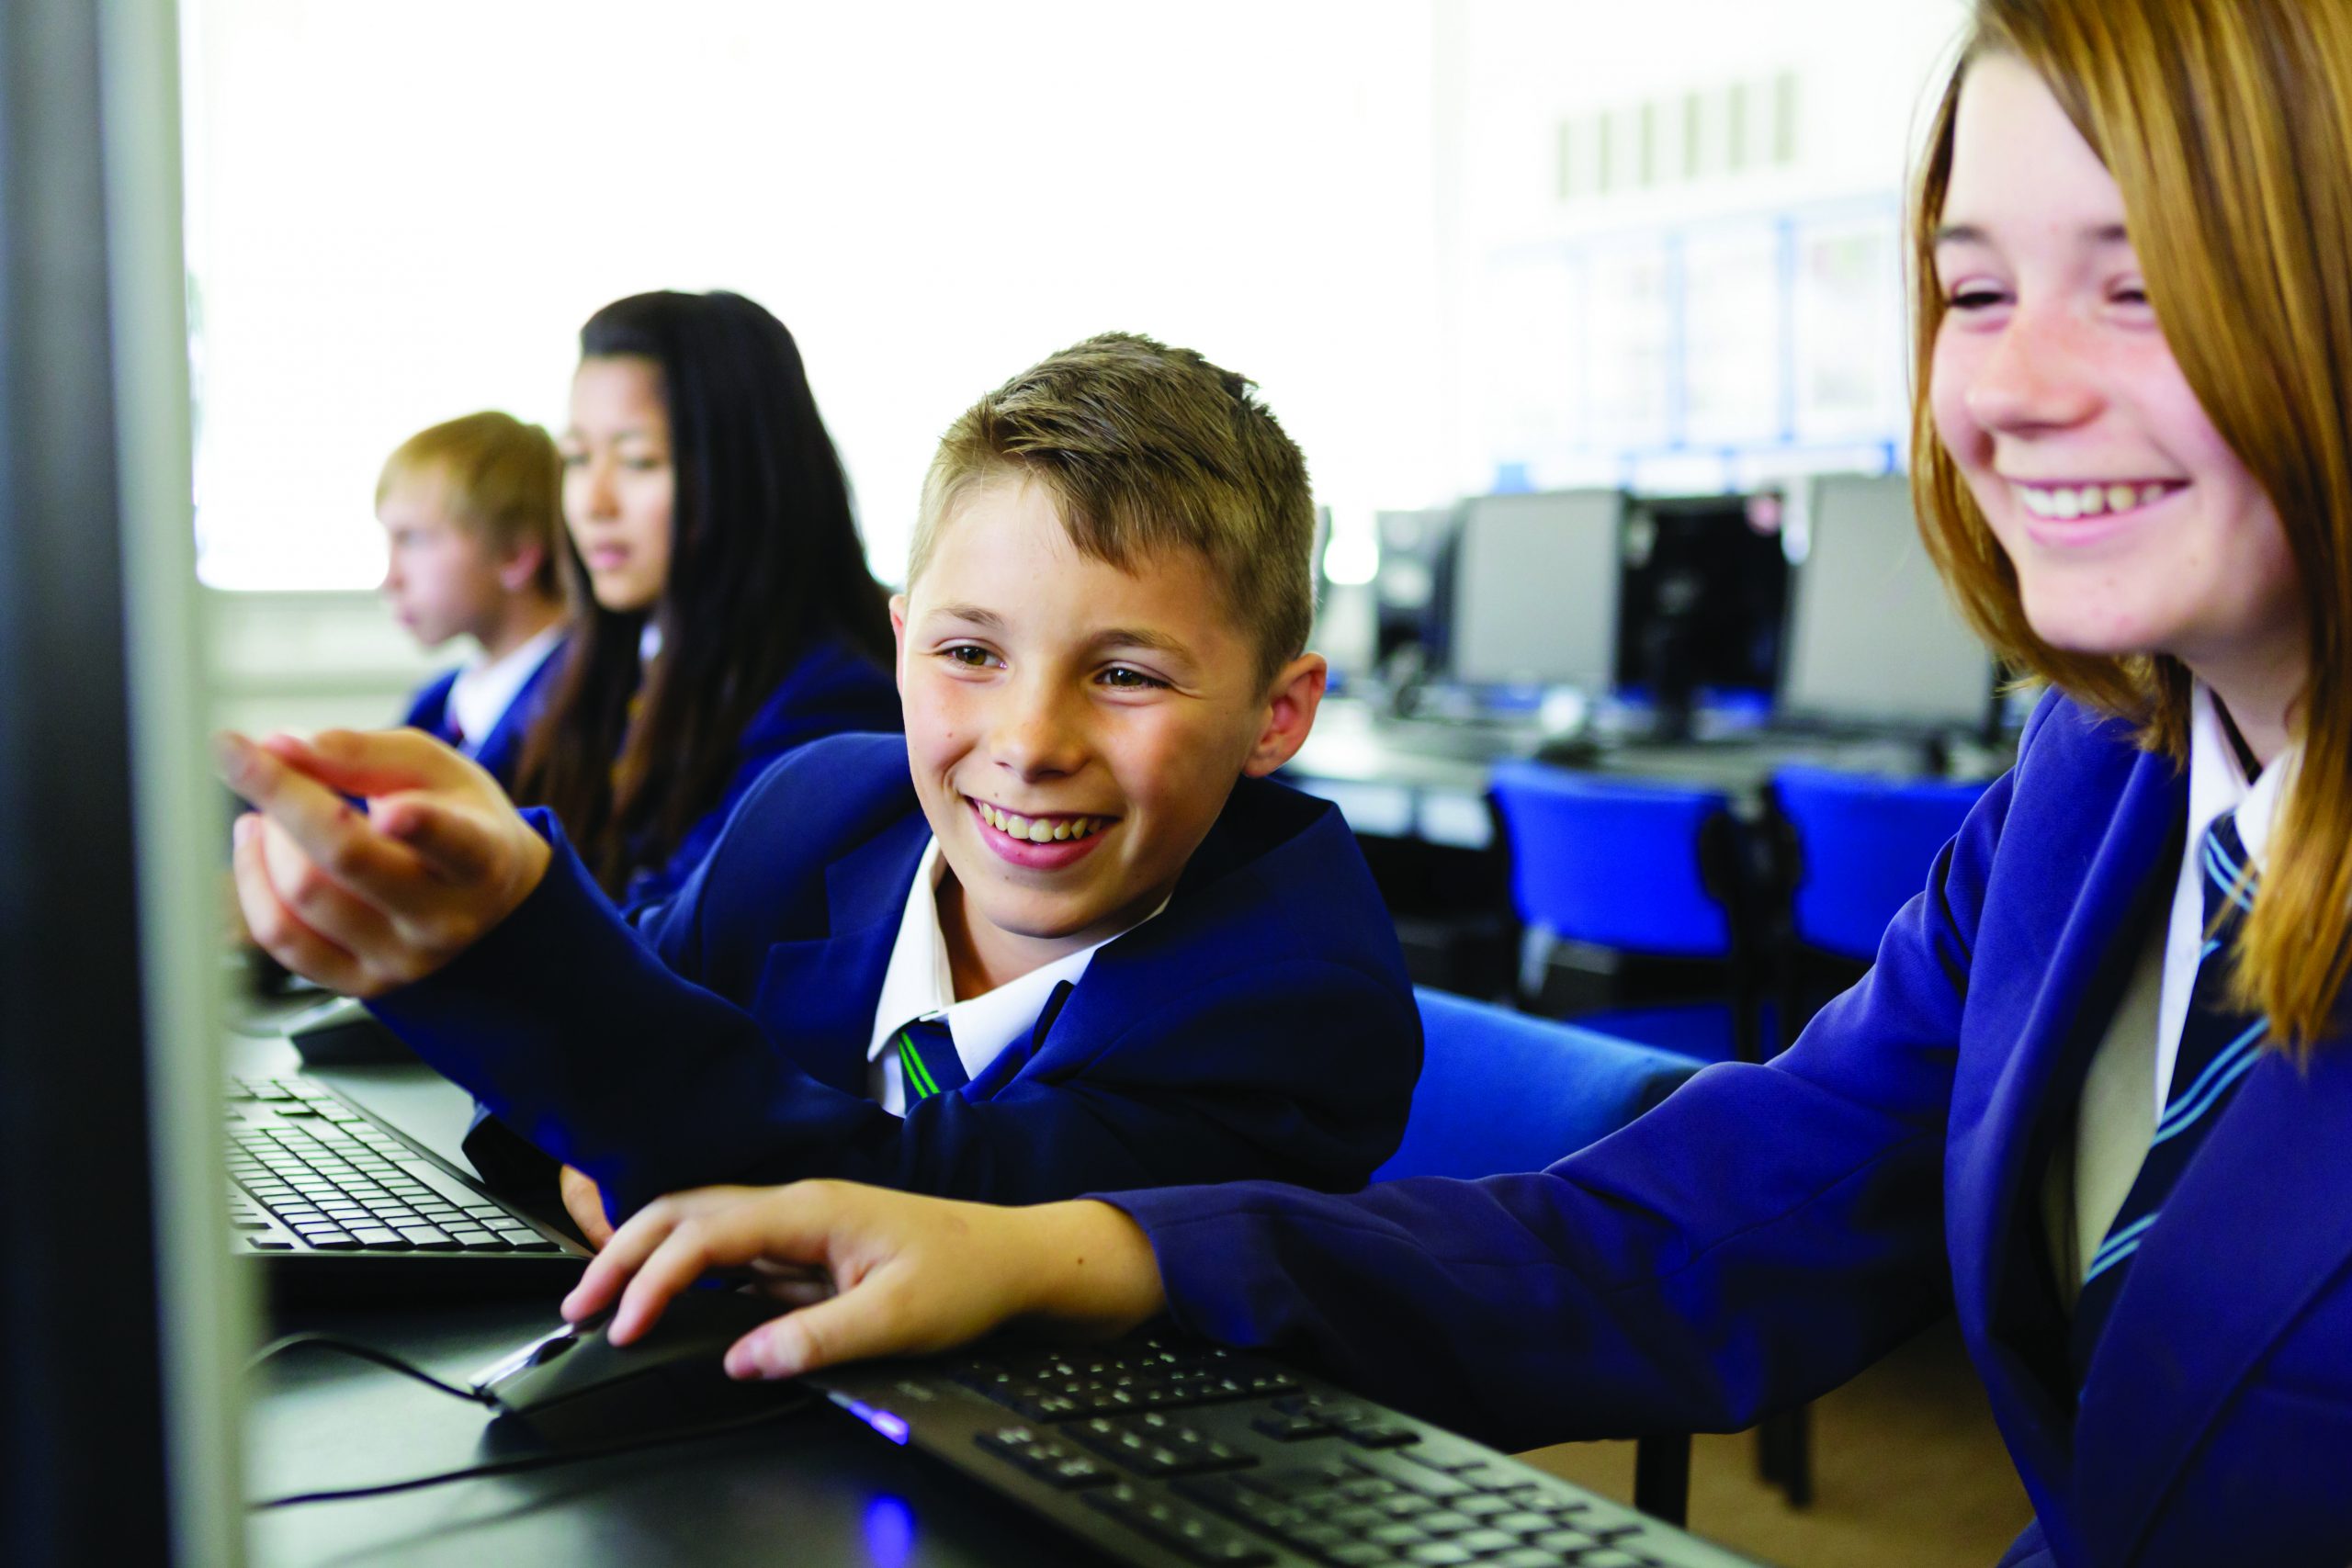 A girl and a boy smiling while using a computer